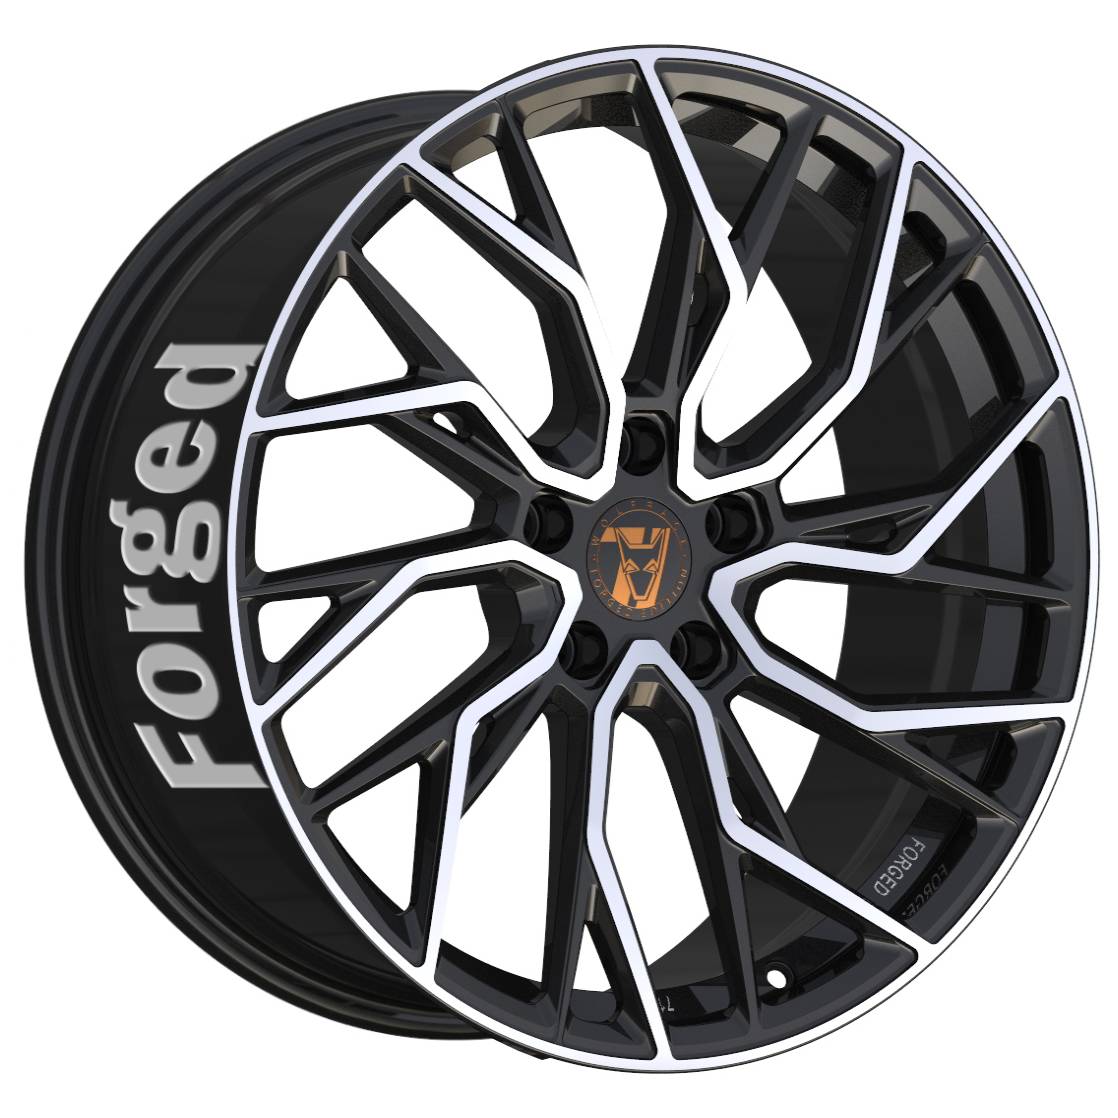 Jantes alu Demon Wheels 71 Forged Edition Voodoo Forged [13x23] -5x114.3- ET 30